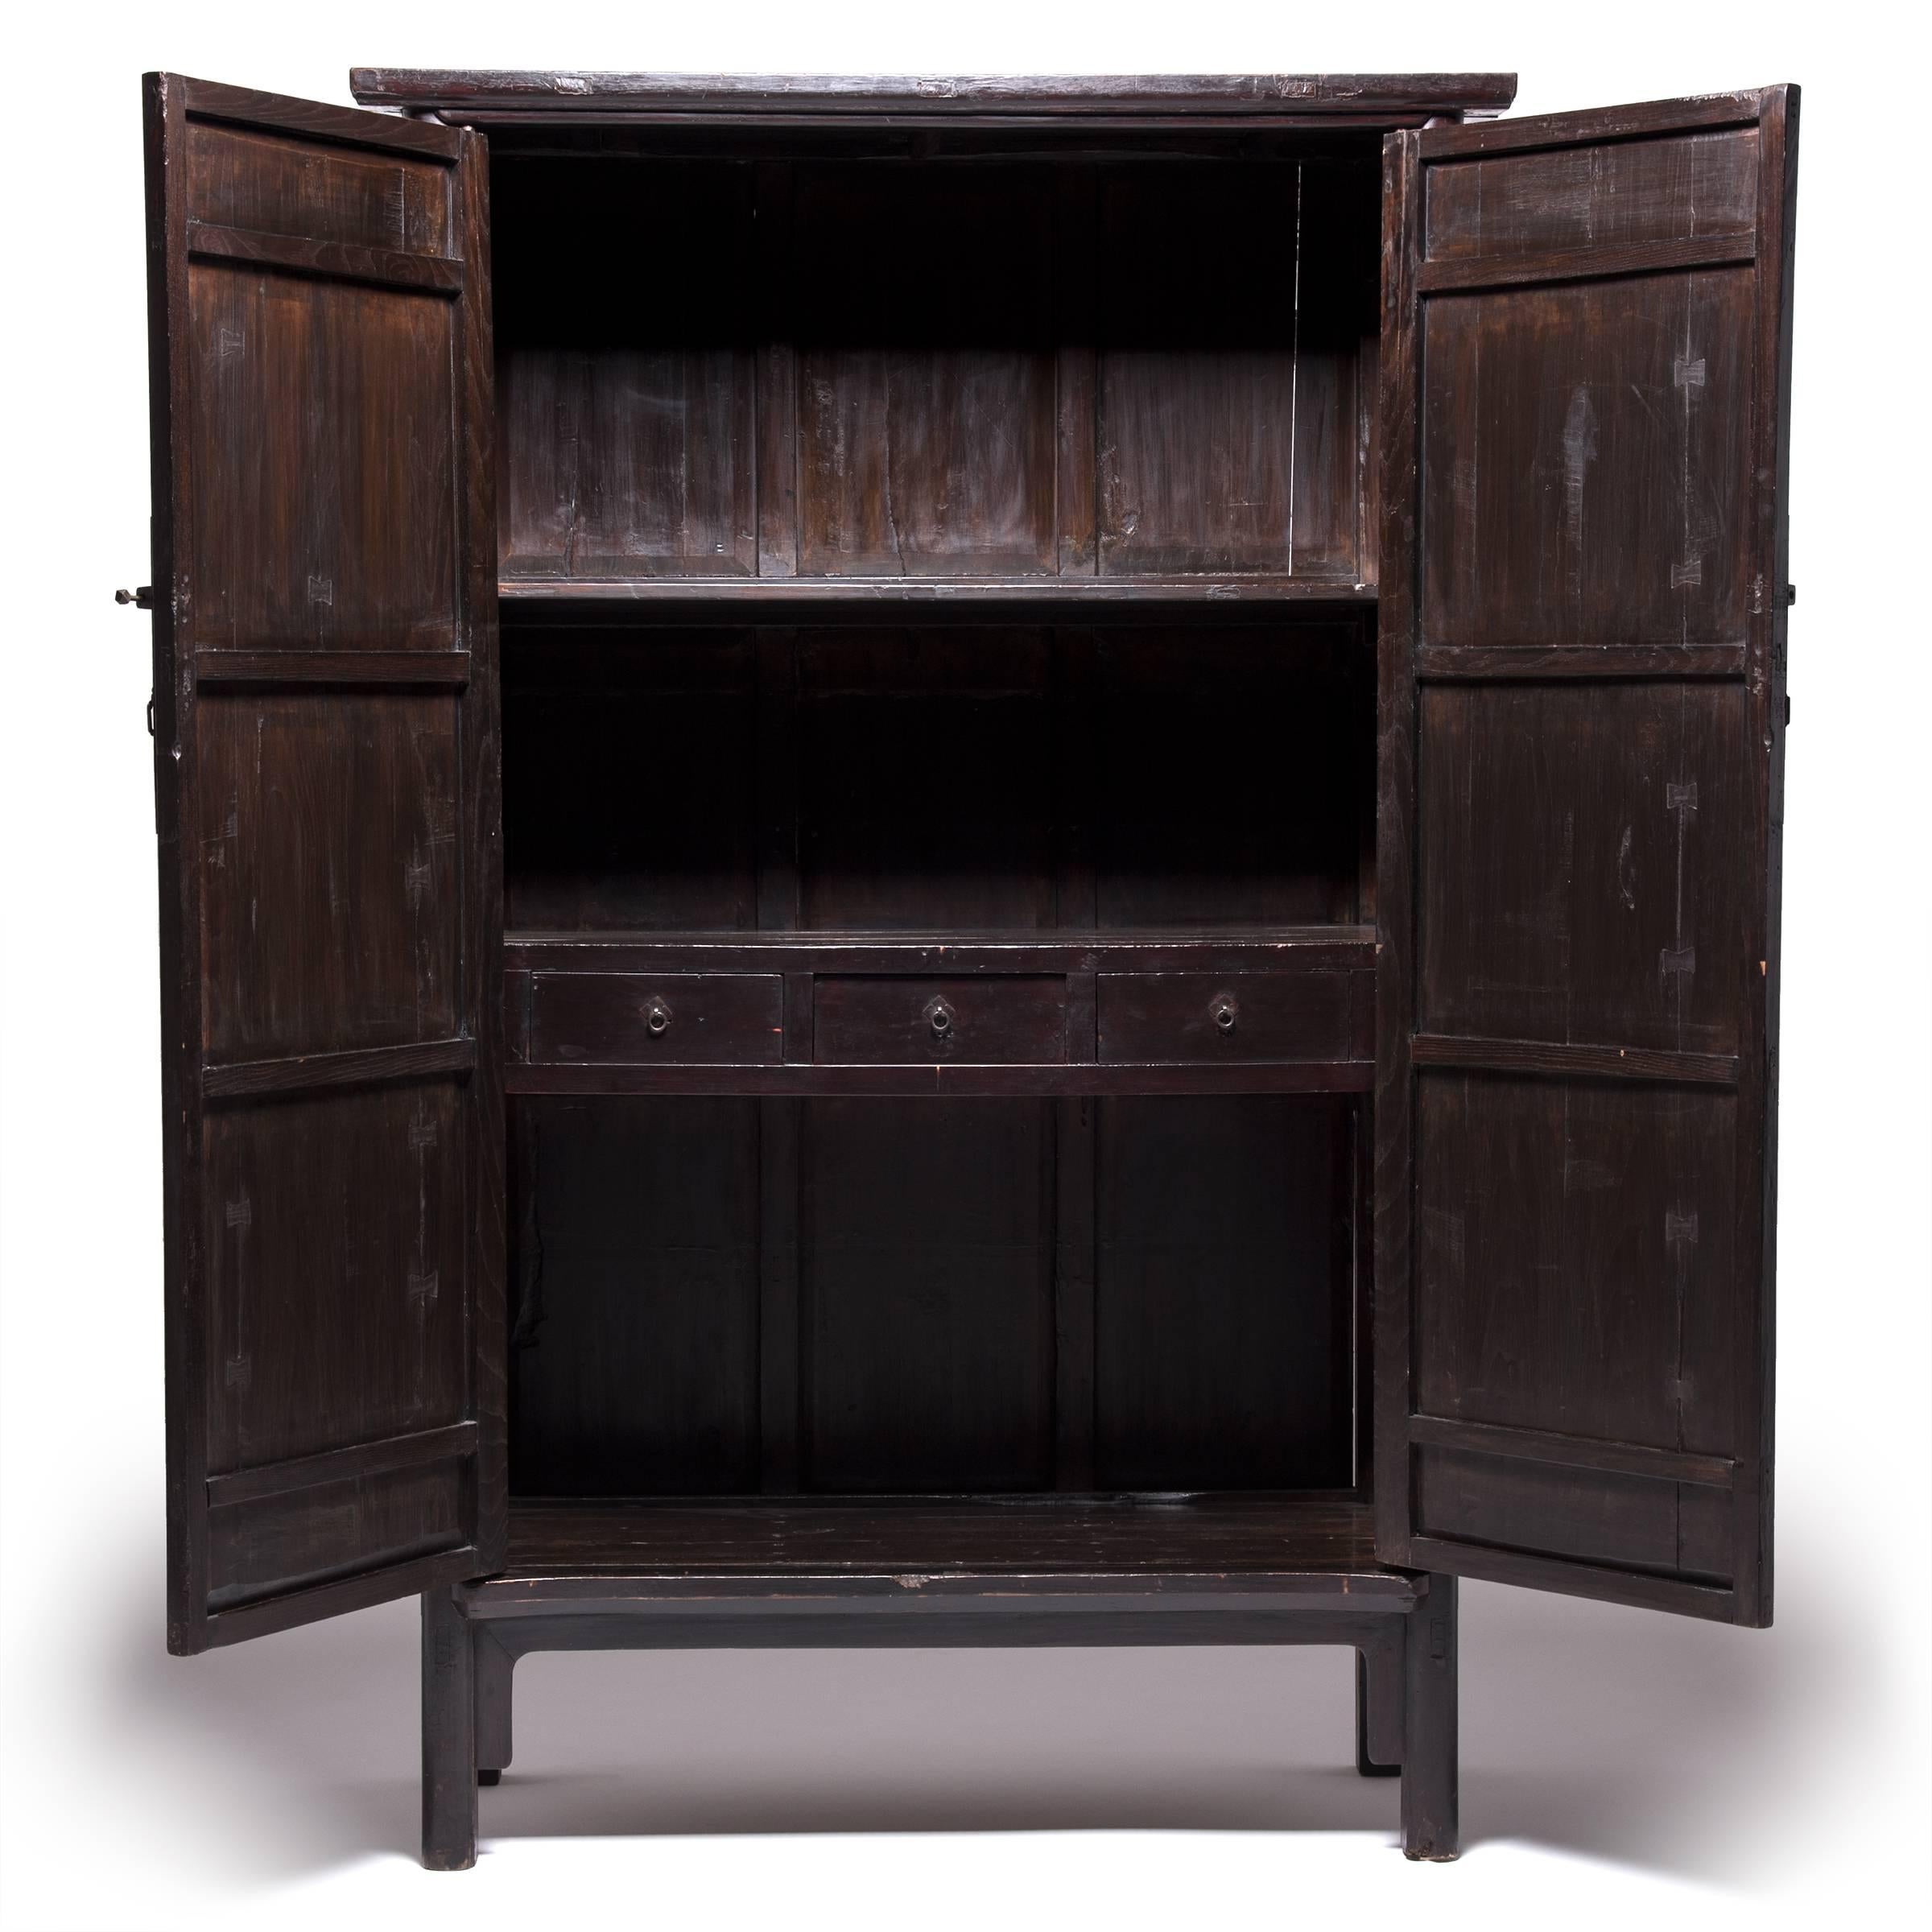 This striking mid-19th century cabinet made in Shanxi province takes its name from the elegant rounded wood detail that outlines its doors and frame. Austere in its simplicity, the cabinet showcases the grain and beautiful brown color of Chinese